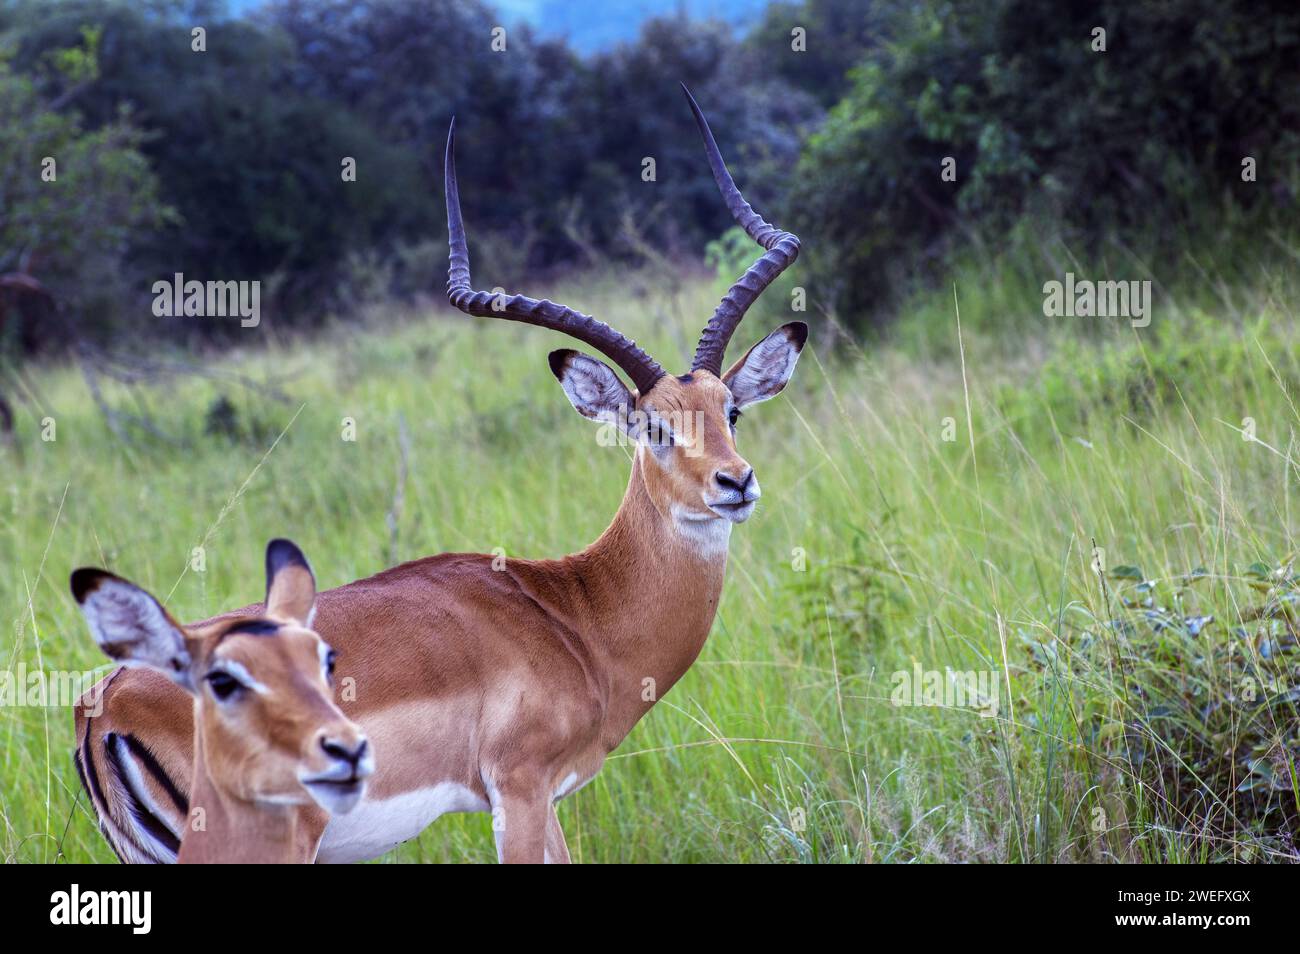 Impalas photographed on safari in Akagera National Park in Northeastern Rwanda, Central Africa’s largest protected wetland. Africa Parks Stock Photo